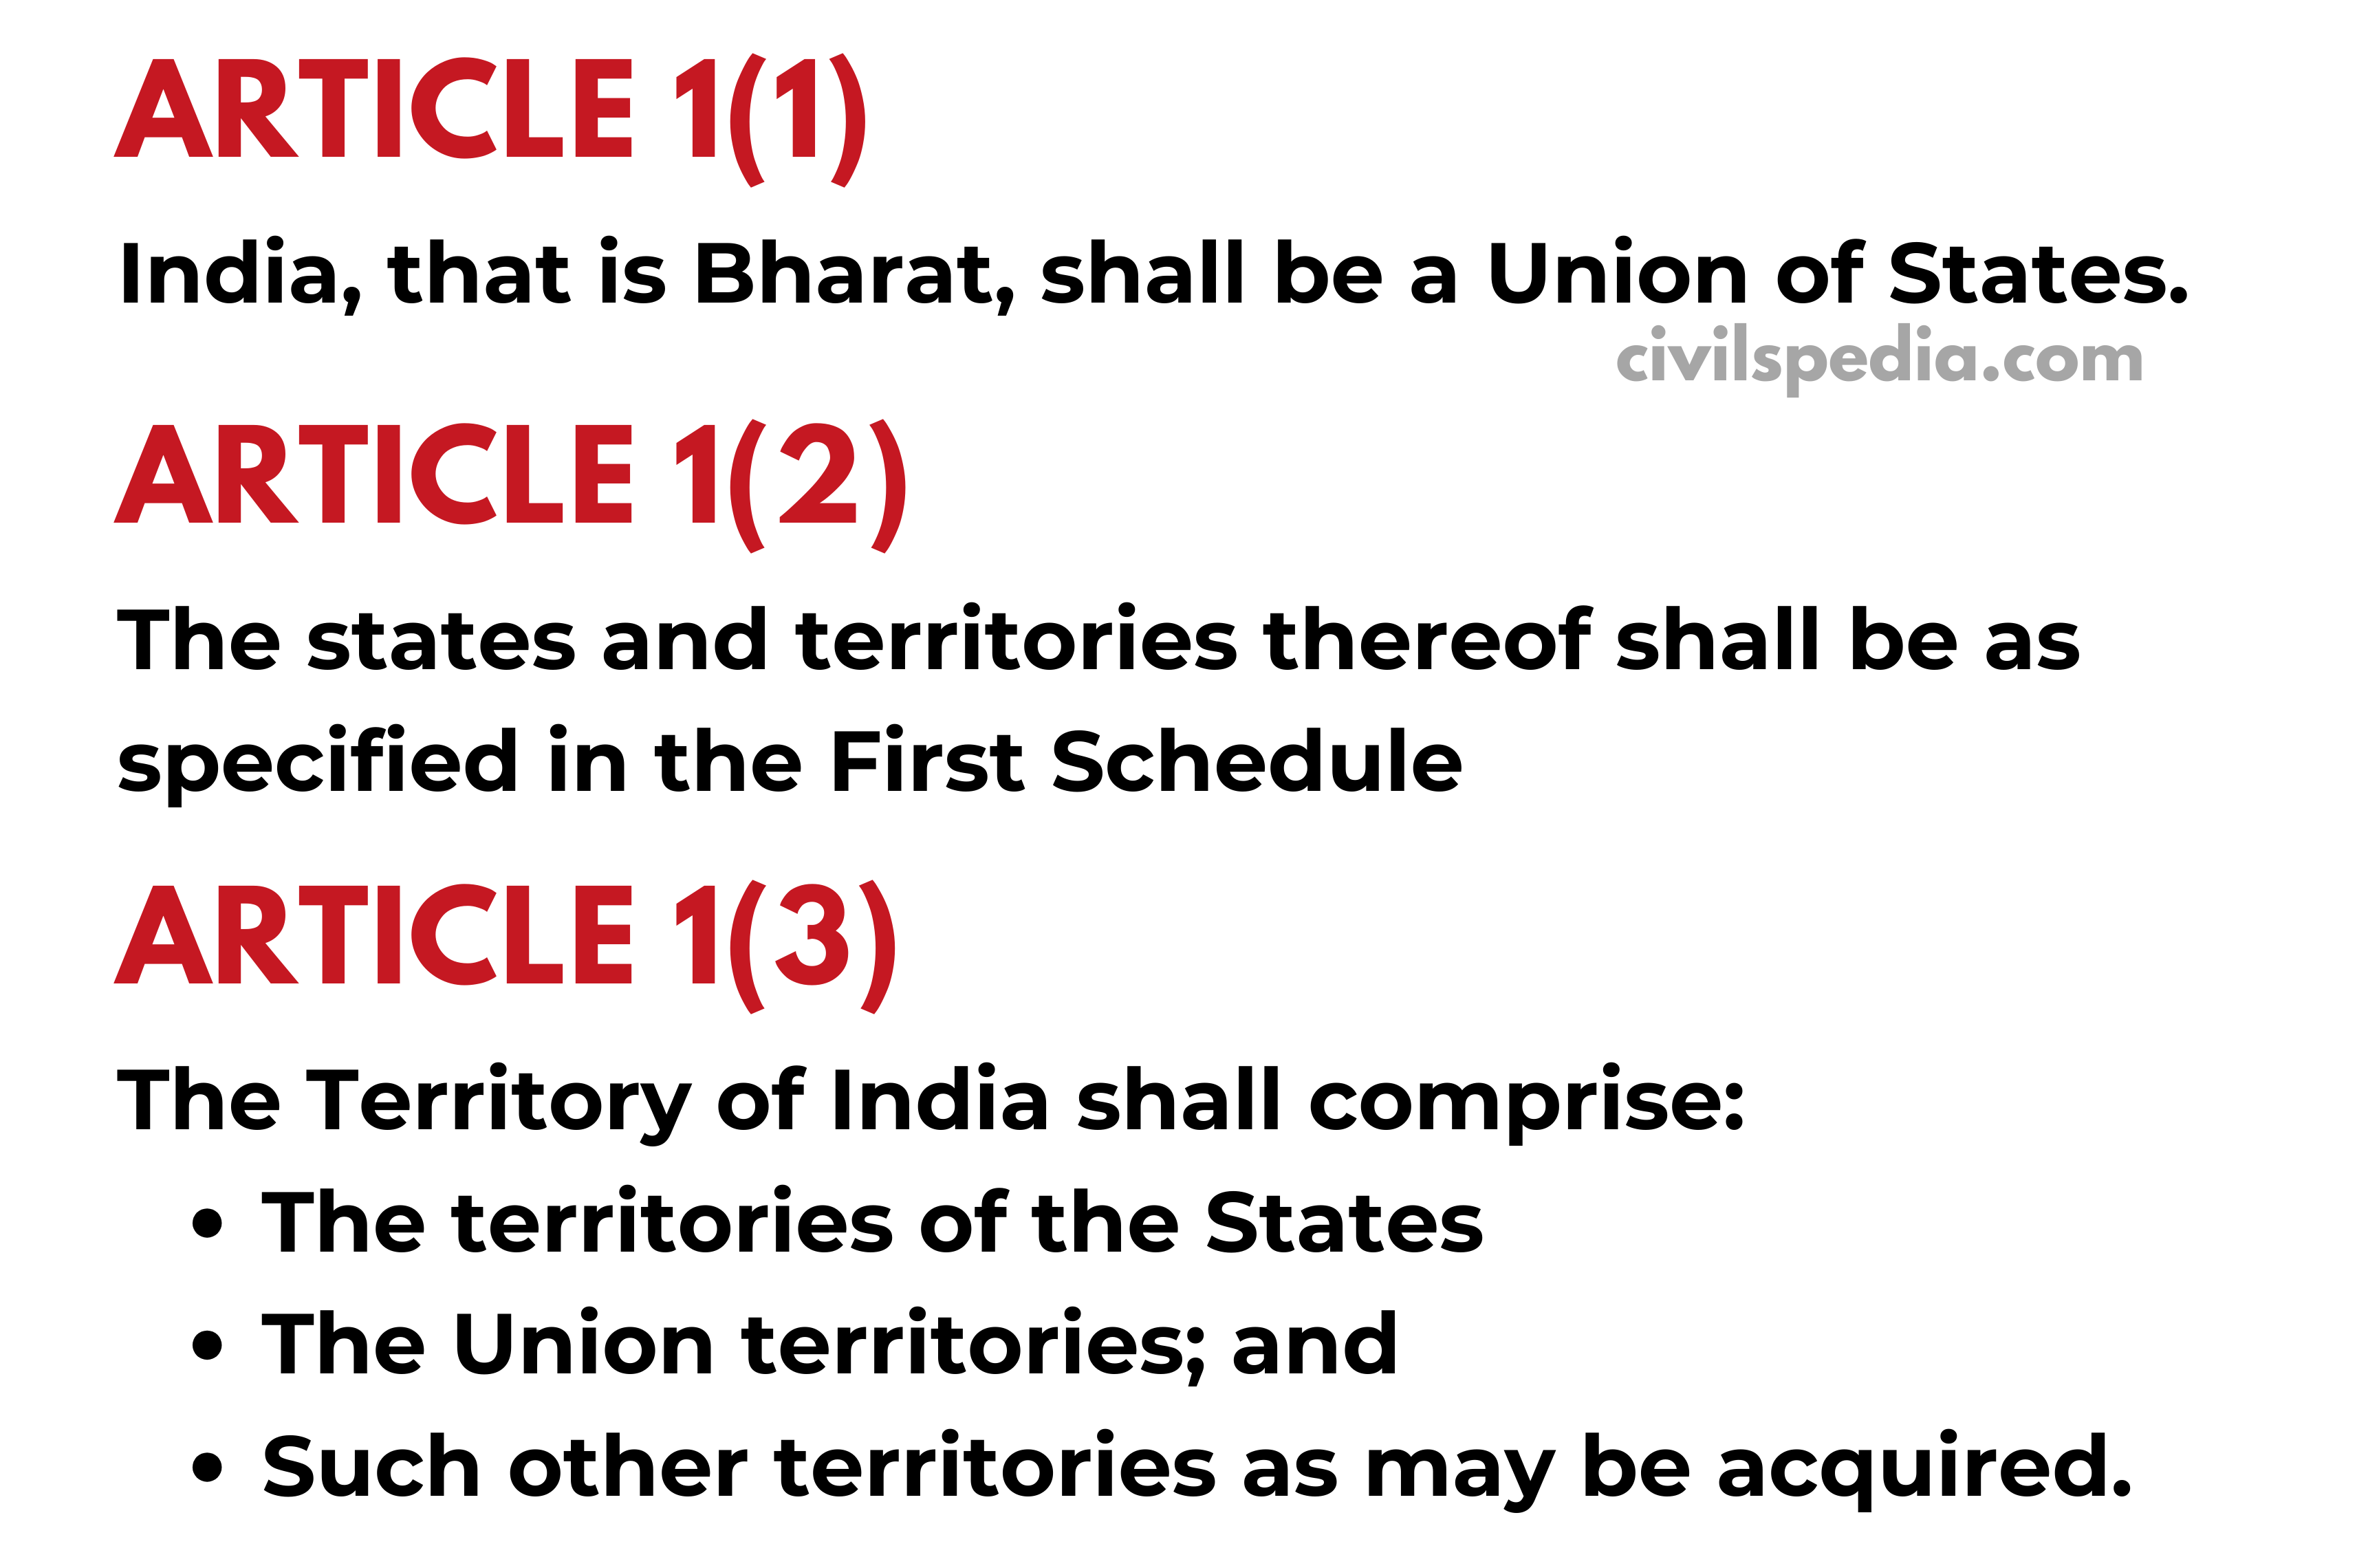 Article 1 of Indian Constitution